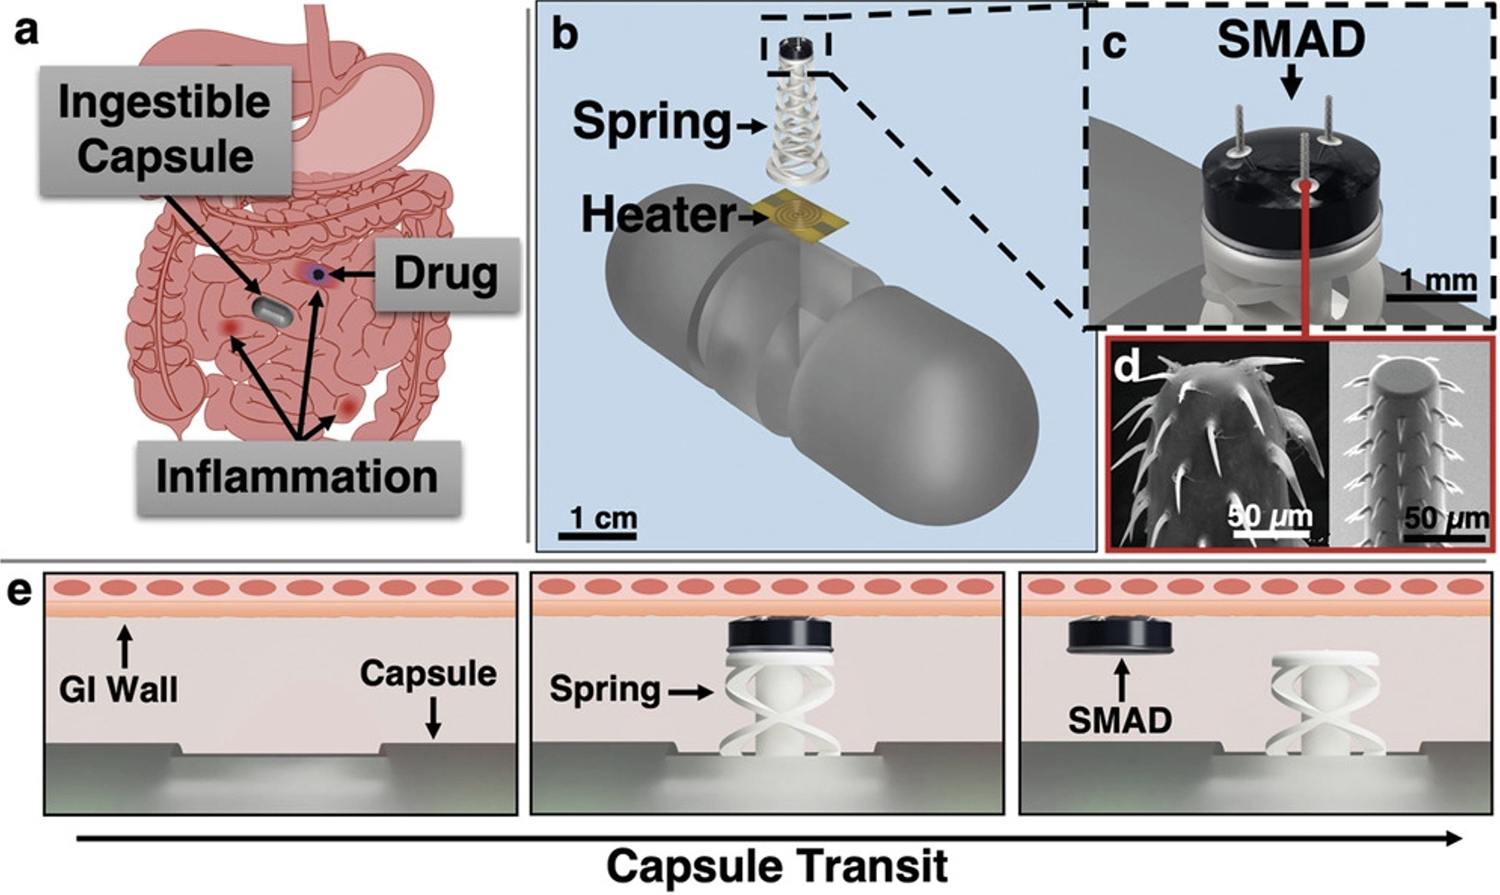 Figure 1 from the paper. (Click for larger view) This figure details the capsule's actuation and SMAD delivery principle. a) Capsule transits through a GI tract with inflammatory lesions and delivers the SMAD to an inflammatory site for prolonged release of a topical therapeutic agent (blue). b) Actuator deployment utilizes a resistive heating element to fire a spring actuator and impart the drug-loaded SMAD into the GI tissue. c) CAD rendering of the SMAD on the actuator. d) Spiny microneedles are designed to mimic a spiny-headed worm proboscis for enhanced anchoring in tissue: Reproduced under terms of the CC-BY license. e) Upon sensed or external command for SMAD delivery, current passes through the heating element, melting the polycaprolactone binder, and firing the spring. The SMAD is then imparted into the tissue and removes as the capsule translates through the intestinal tract.